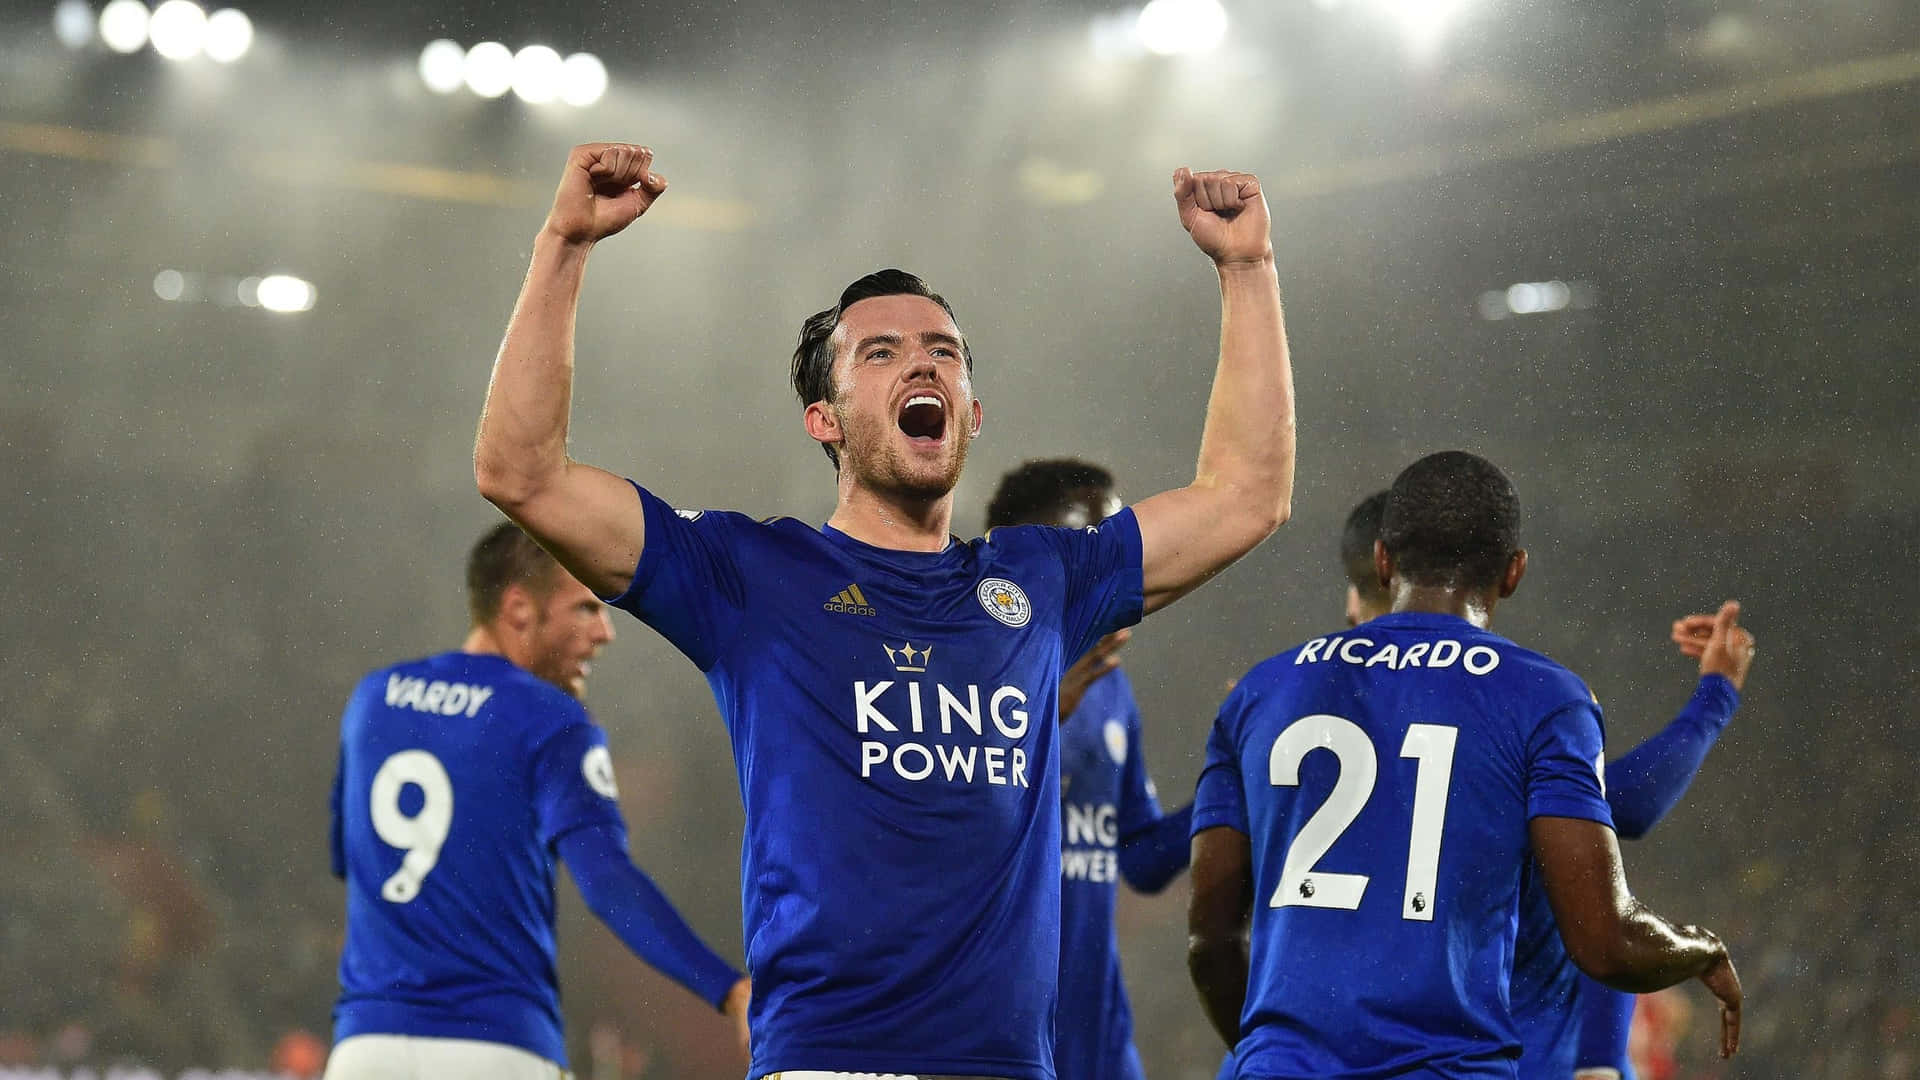 Determined and Victorious - Ben Chilwell Wallpaper